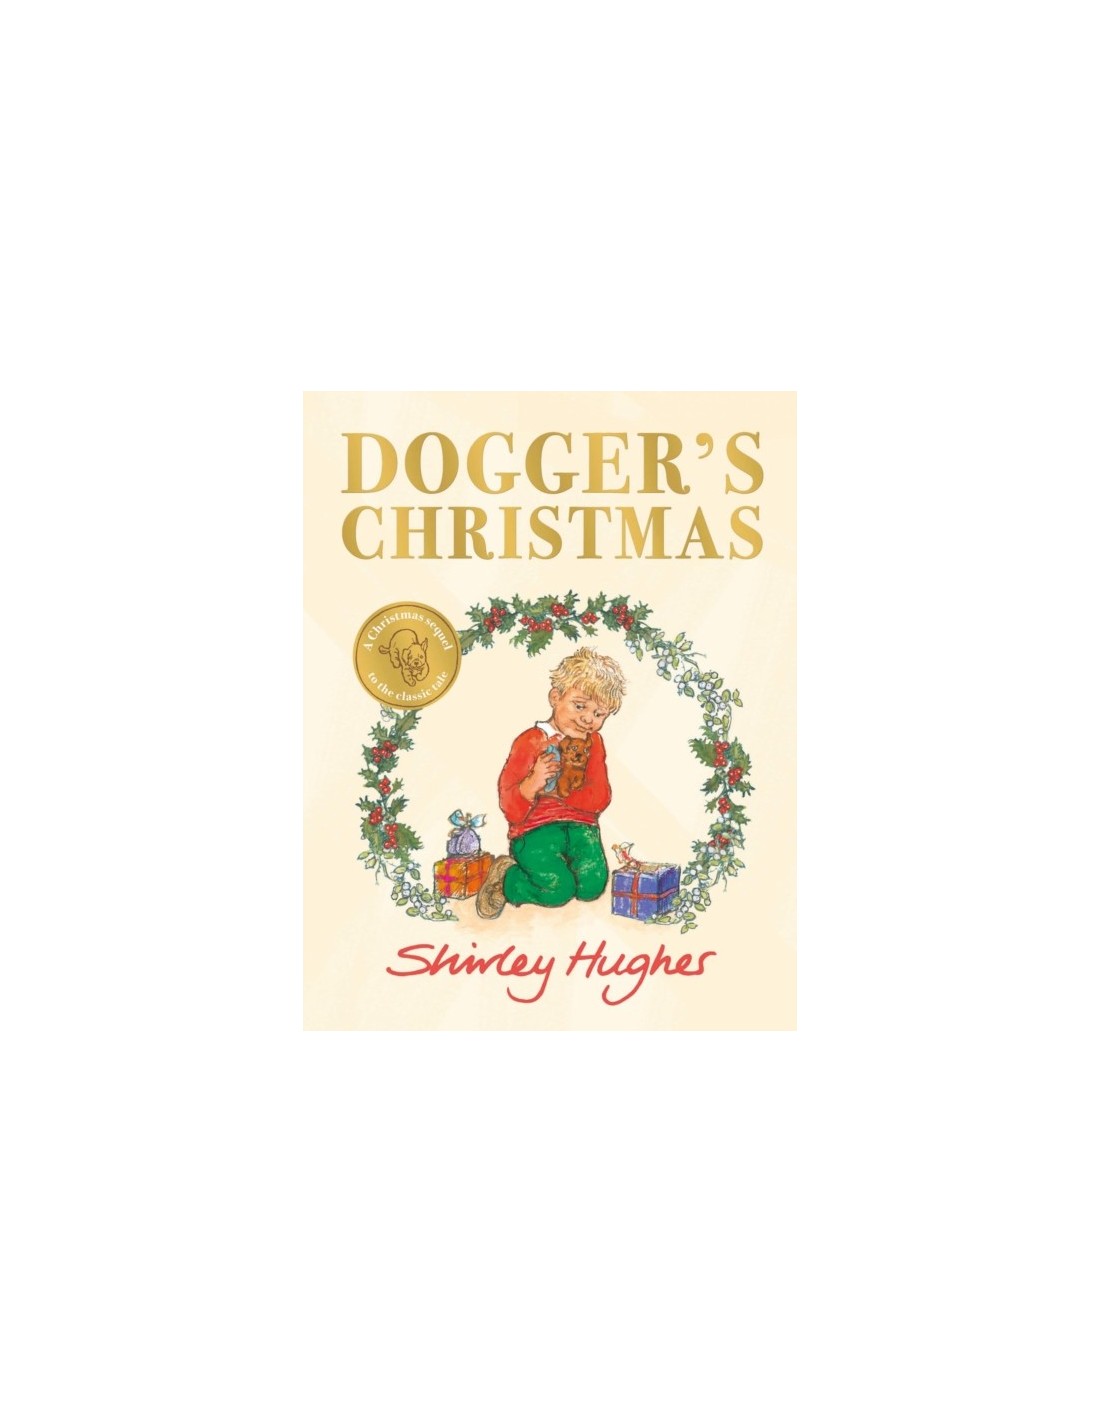 Dogger's Christmas : A seasonal sequel to the beloved Dogger